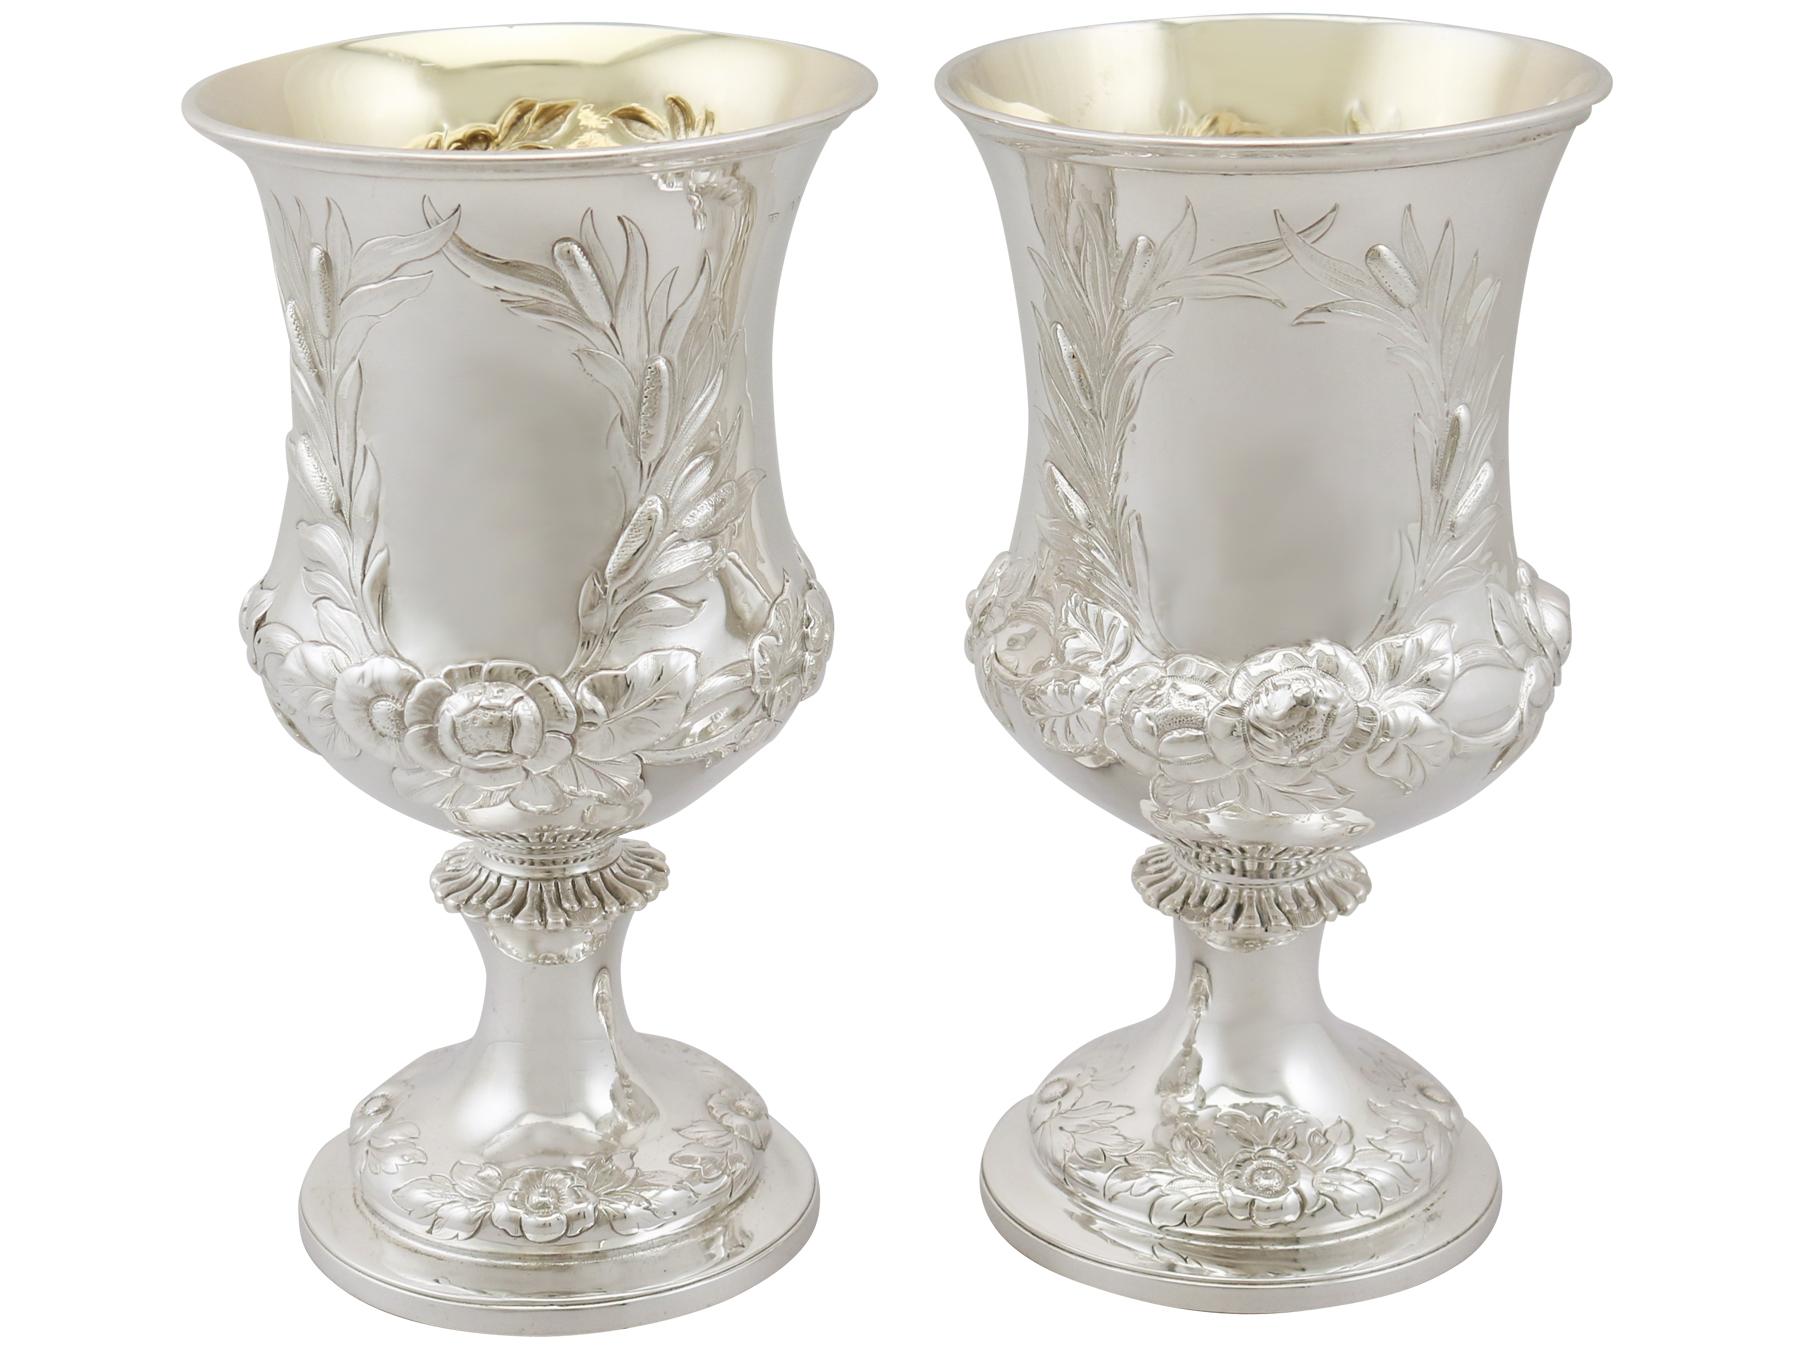 An exceptional, fine and impressive composite pair of antique Victorian English sterling silver goblets; an addition to our range of wine and drink related silverware.

These exceptional antique Victorian composite English sterling silver goblets